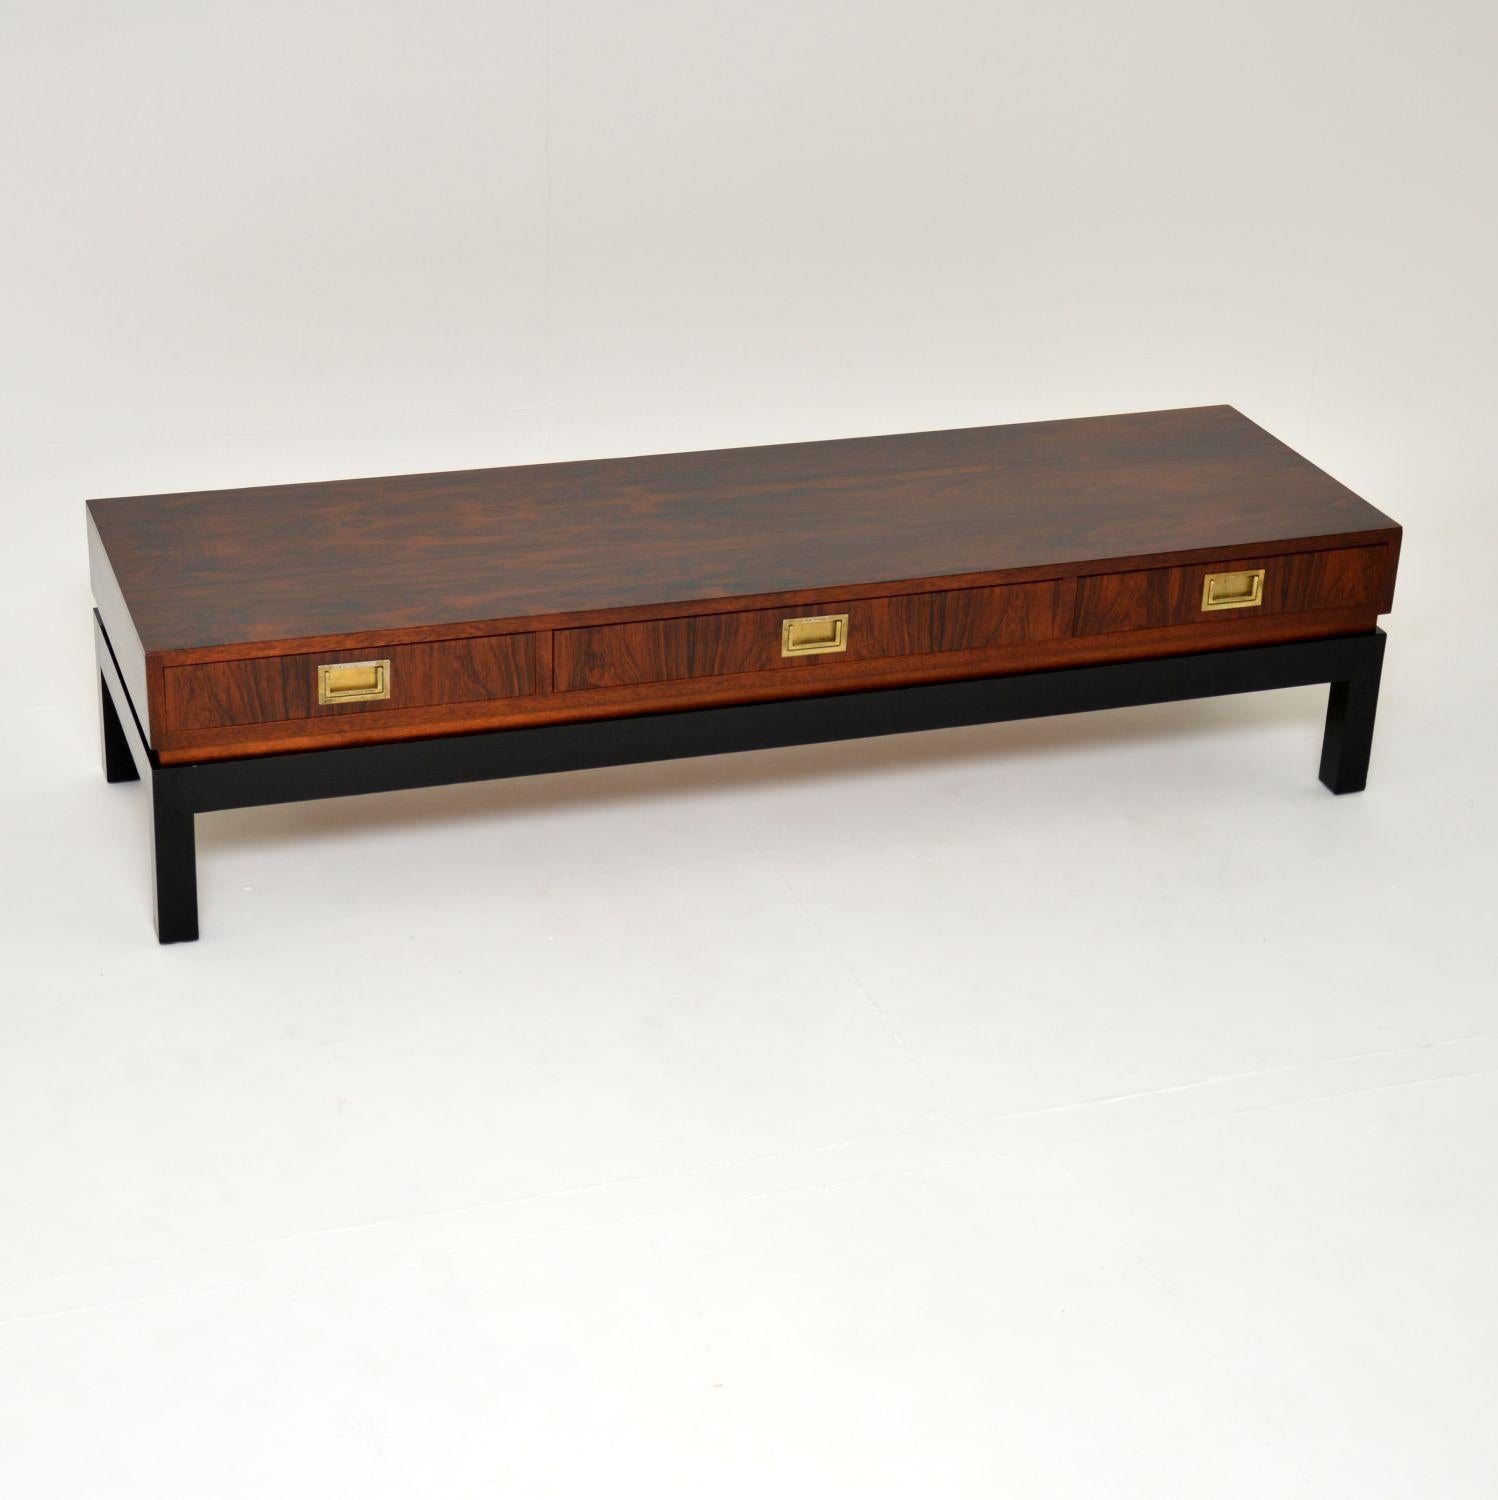 An absolutely stunning and very rare coffee table. This was made in England by Greaves and Thomas, it dates from the 1960’s.

The design is fabulous, it is low and long, with three double sided drawers that run all the way through and open on both